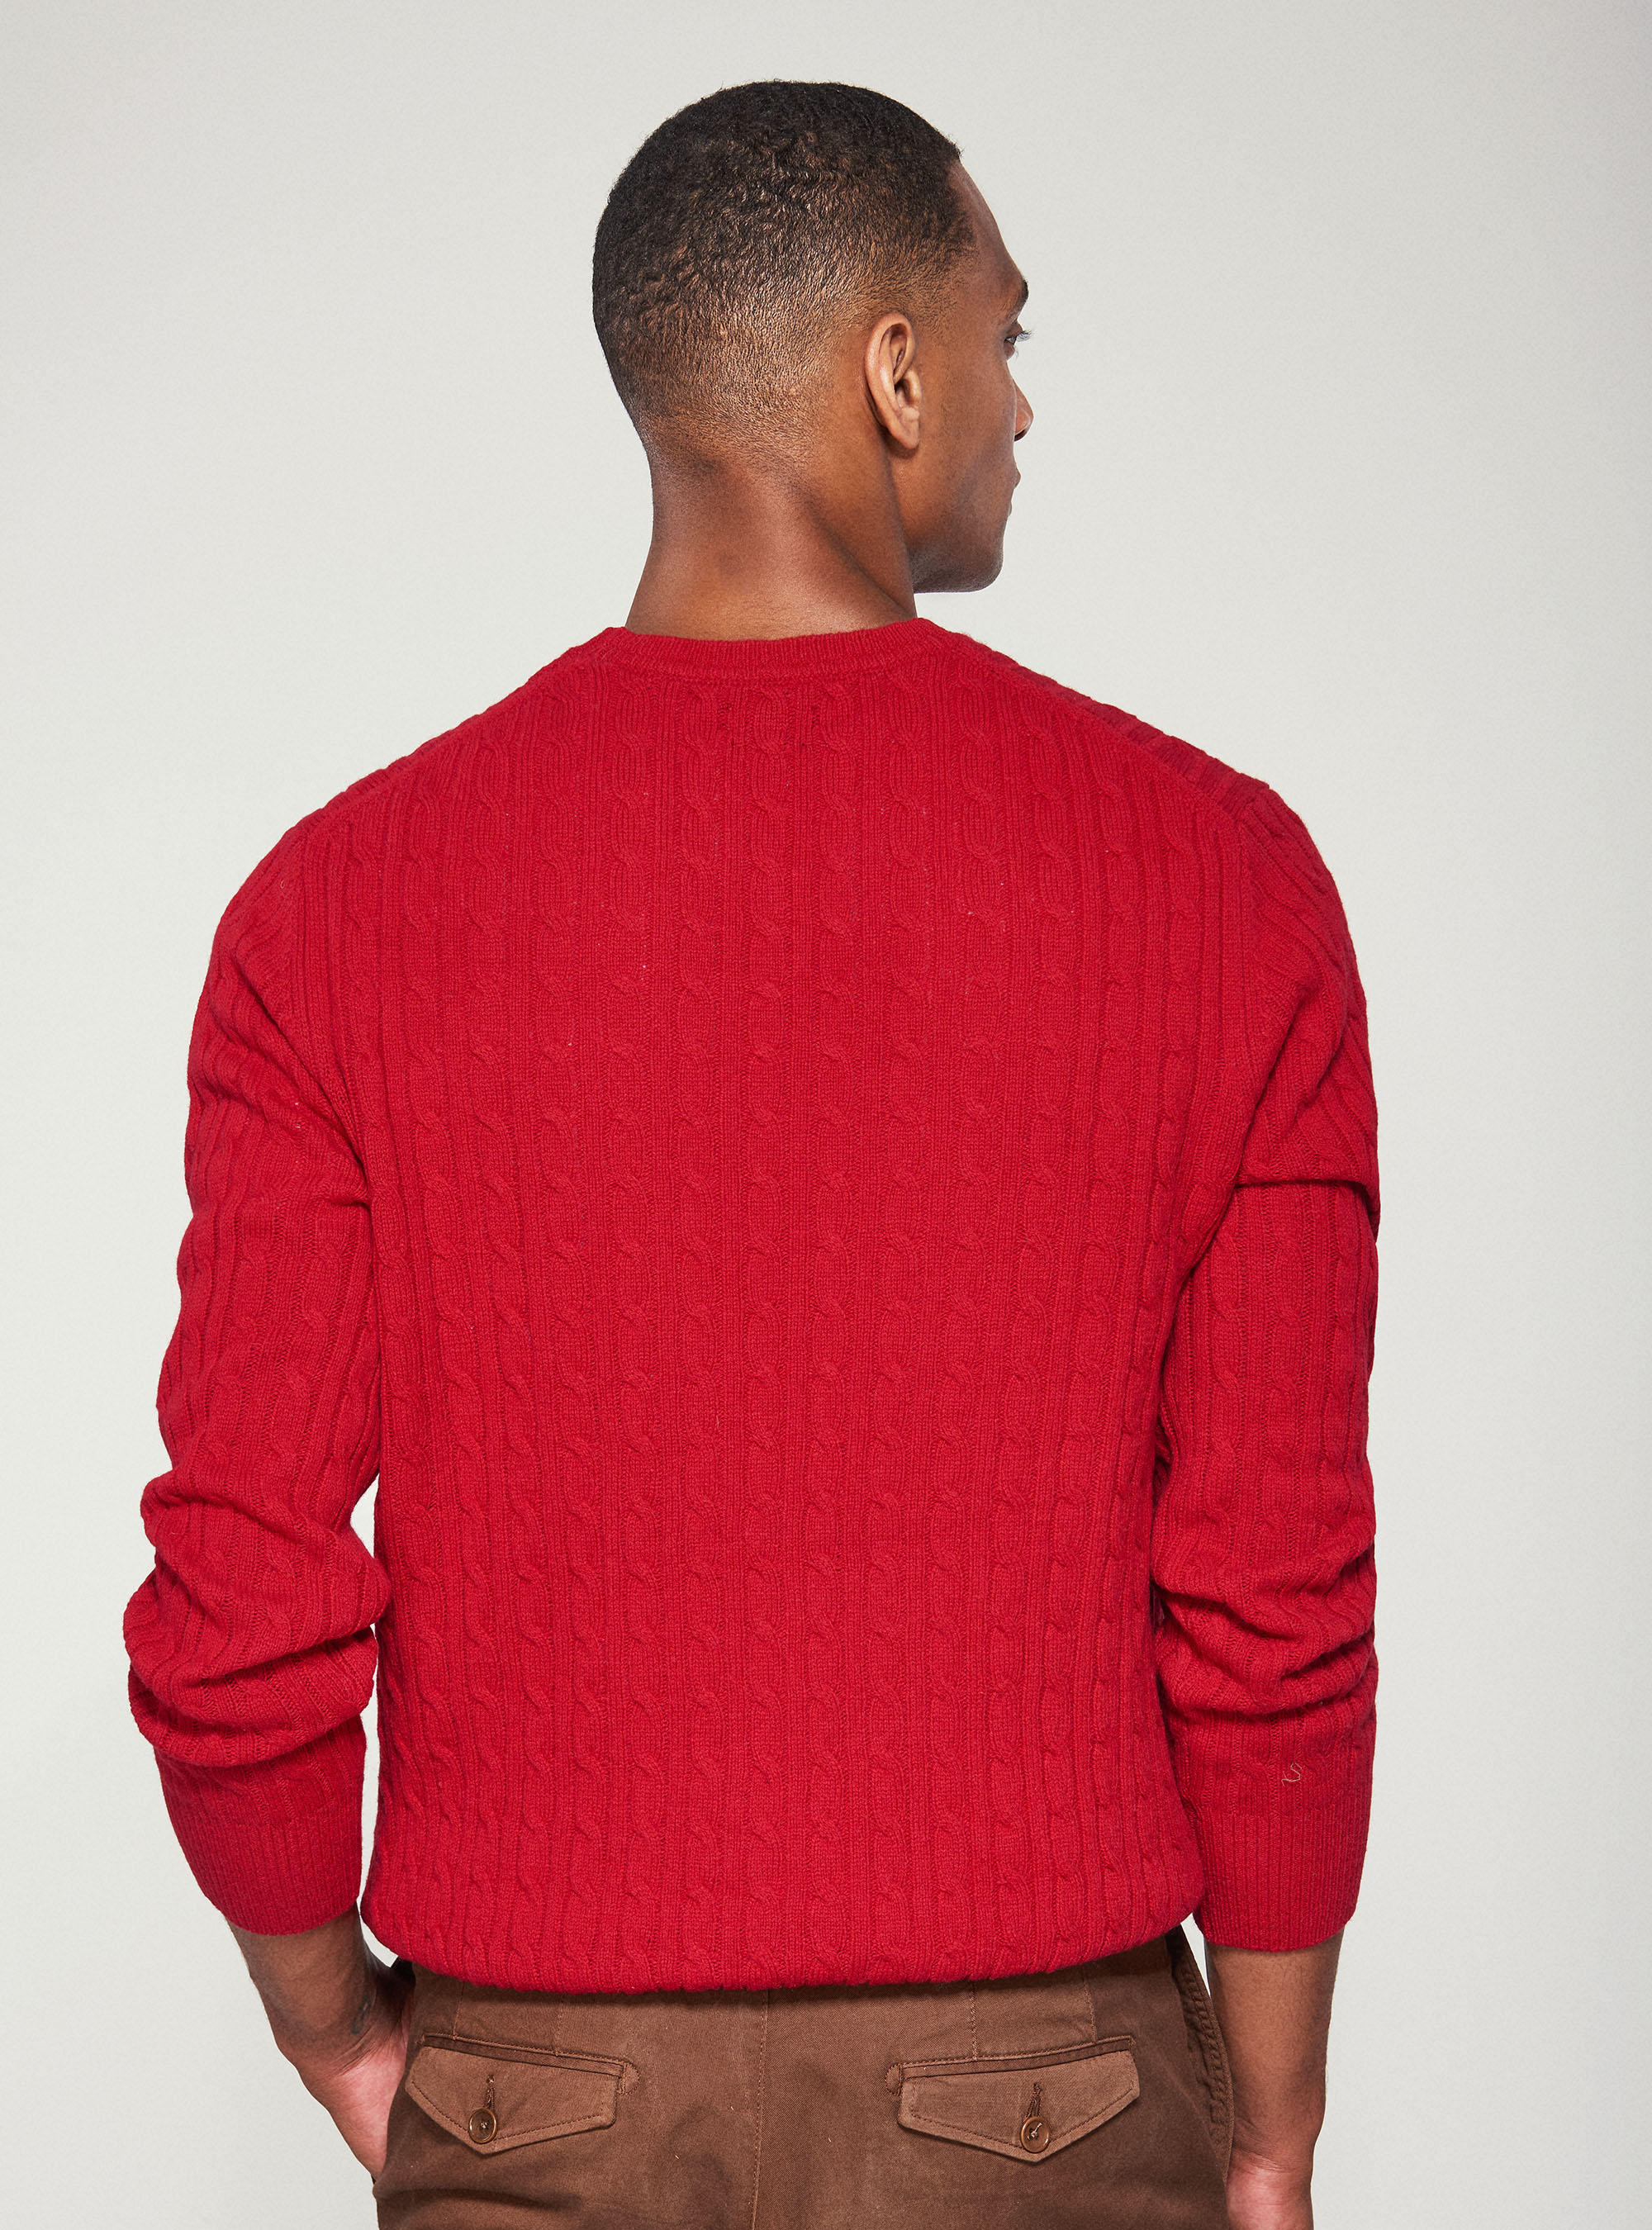 Wooden Sweater Comb – Cashmere-RED